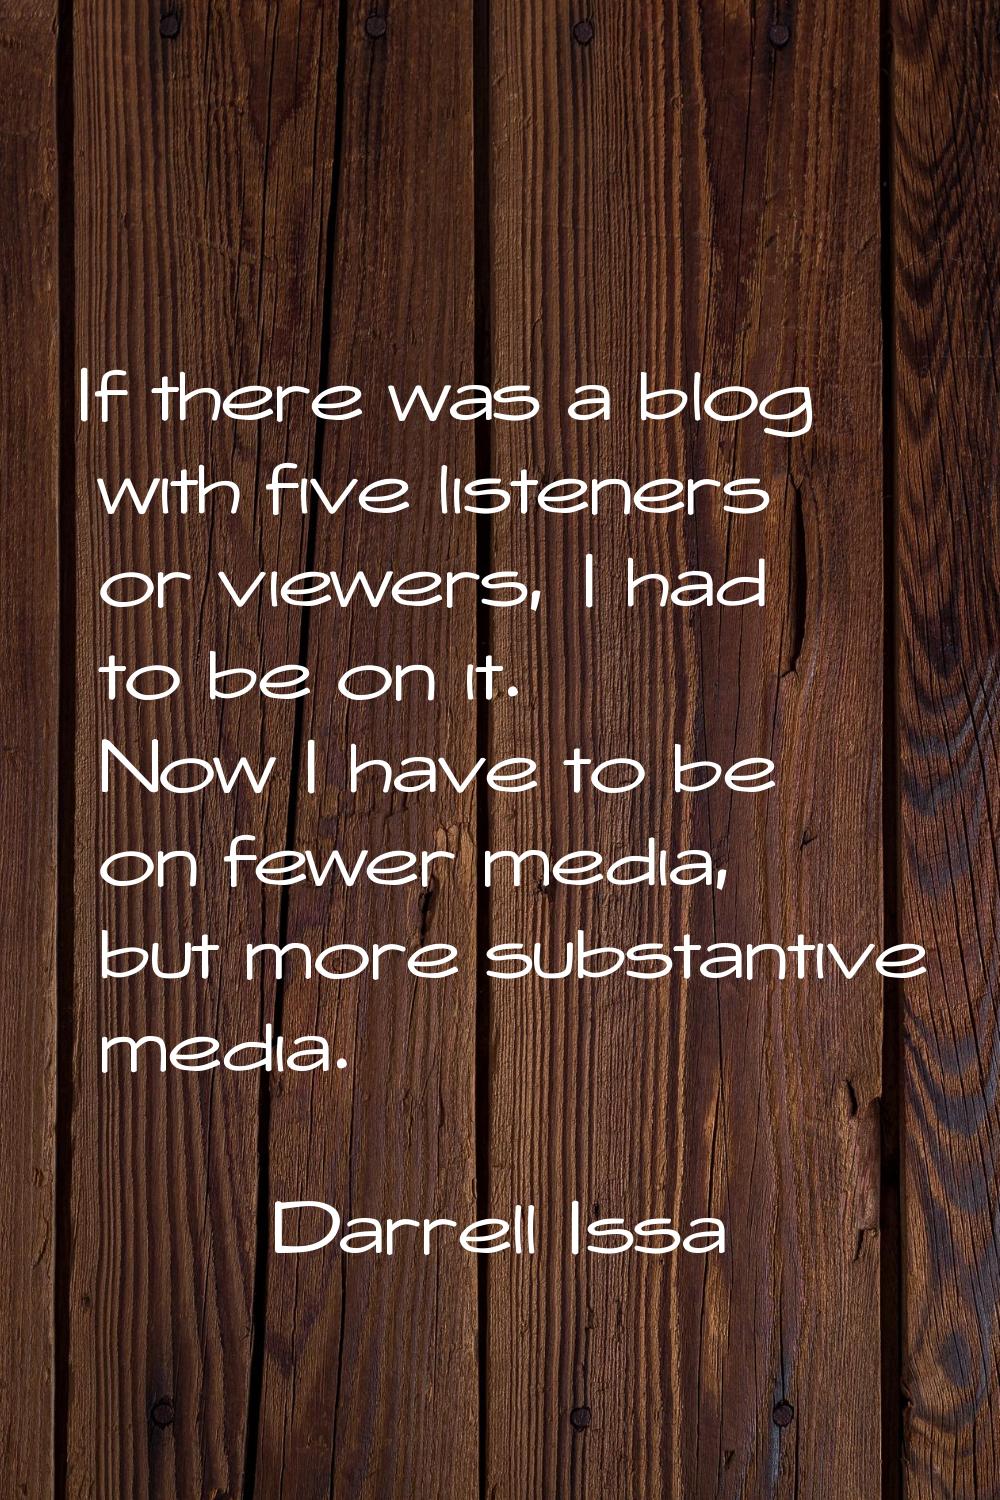 If there was a blog with five listeners or viewers, I had to be on it. Now I have to be on fewer me